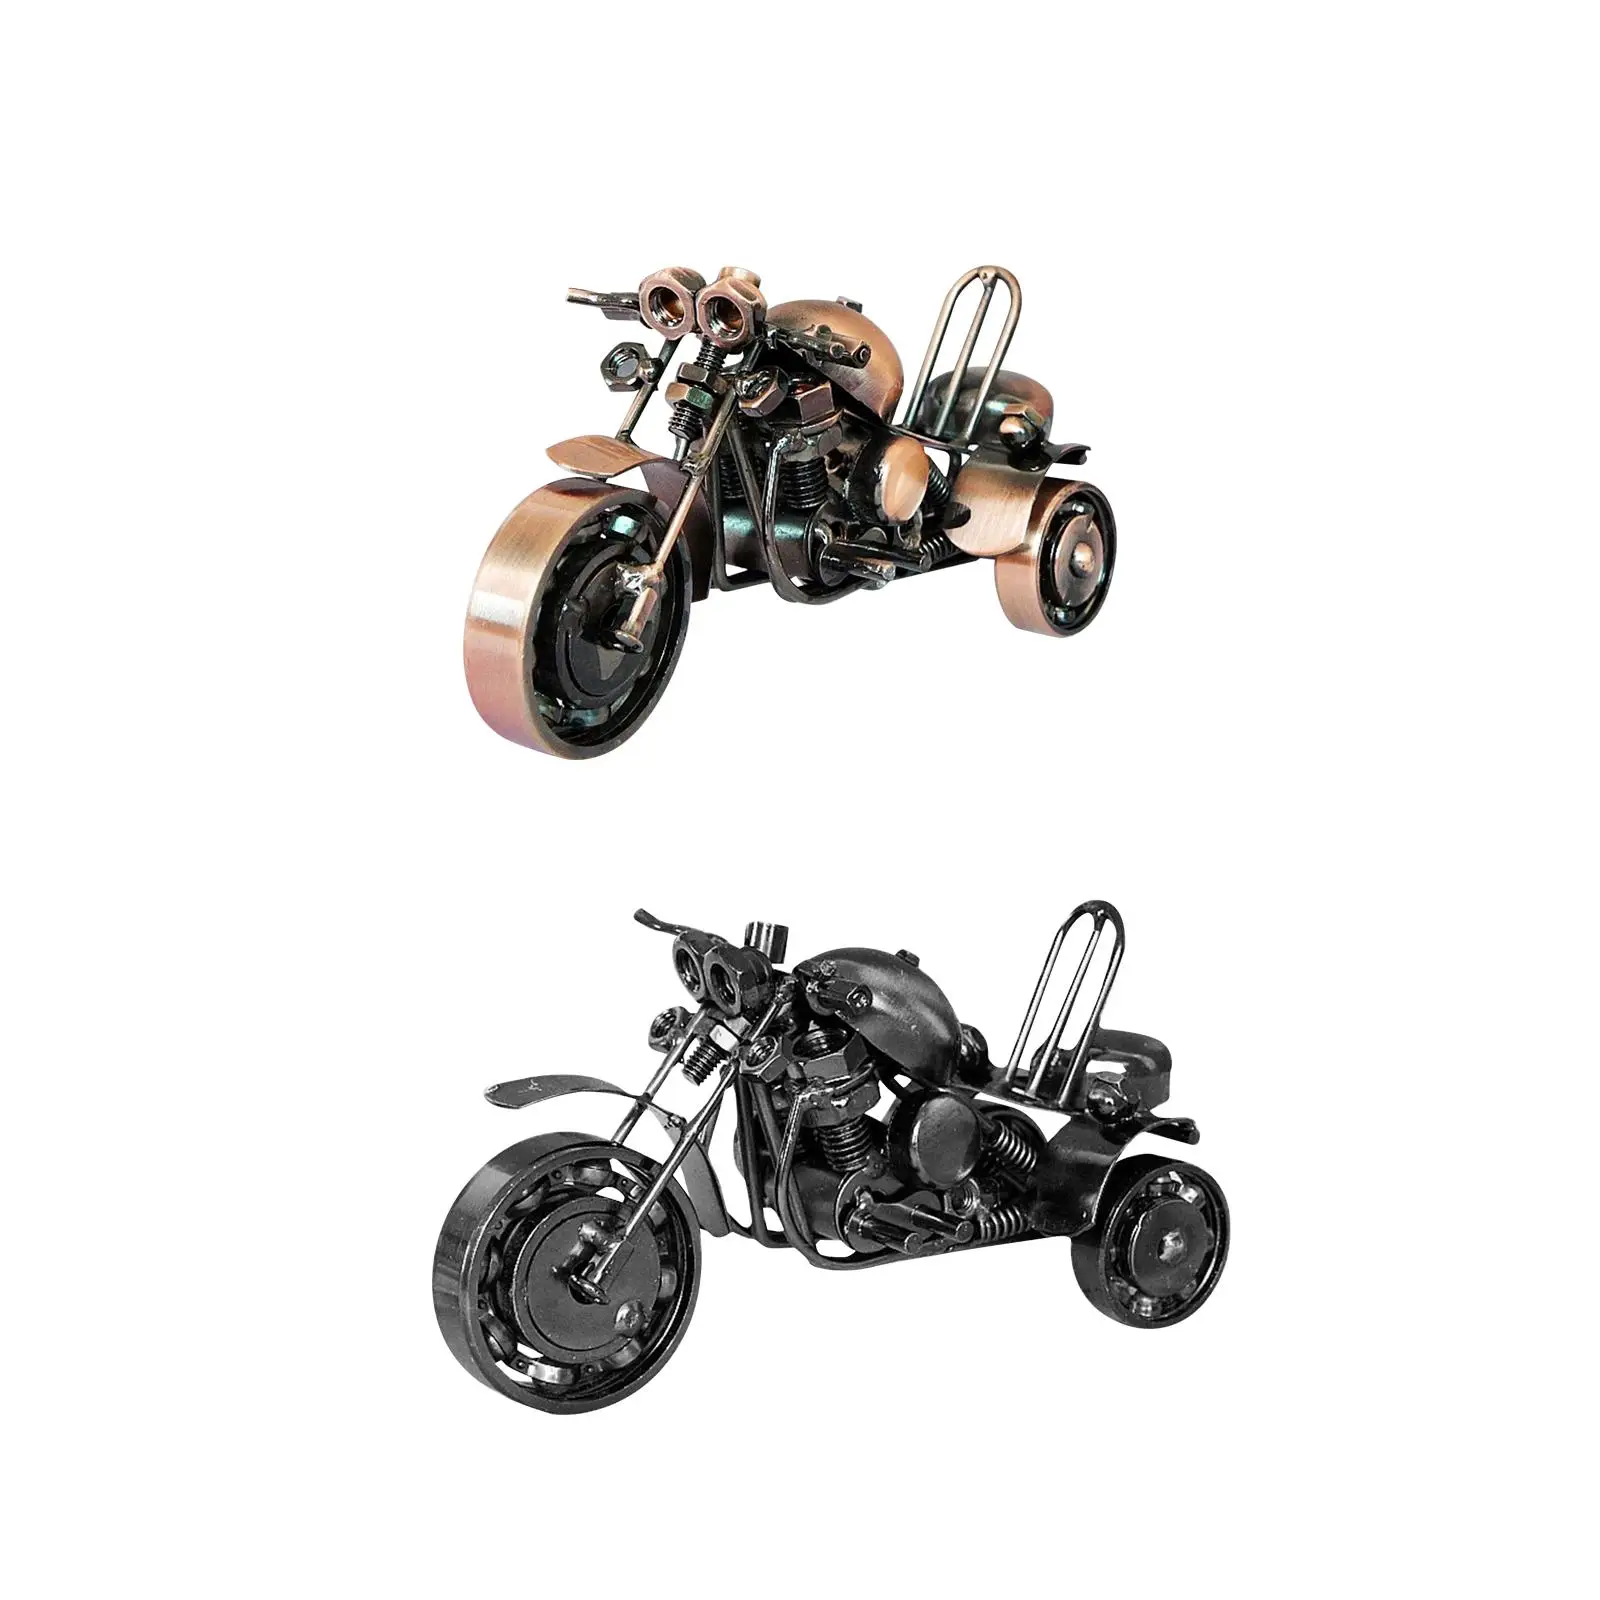 Motor Tricycle Iron Art Sculpture Motorcycle Model for Club Bar Decor Sturdy